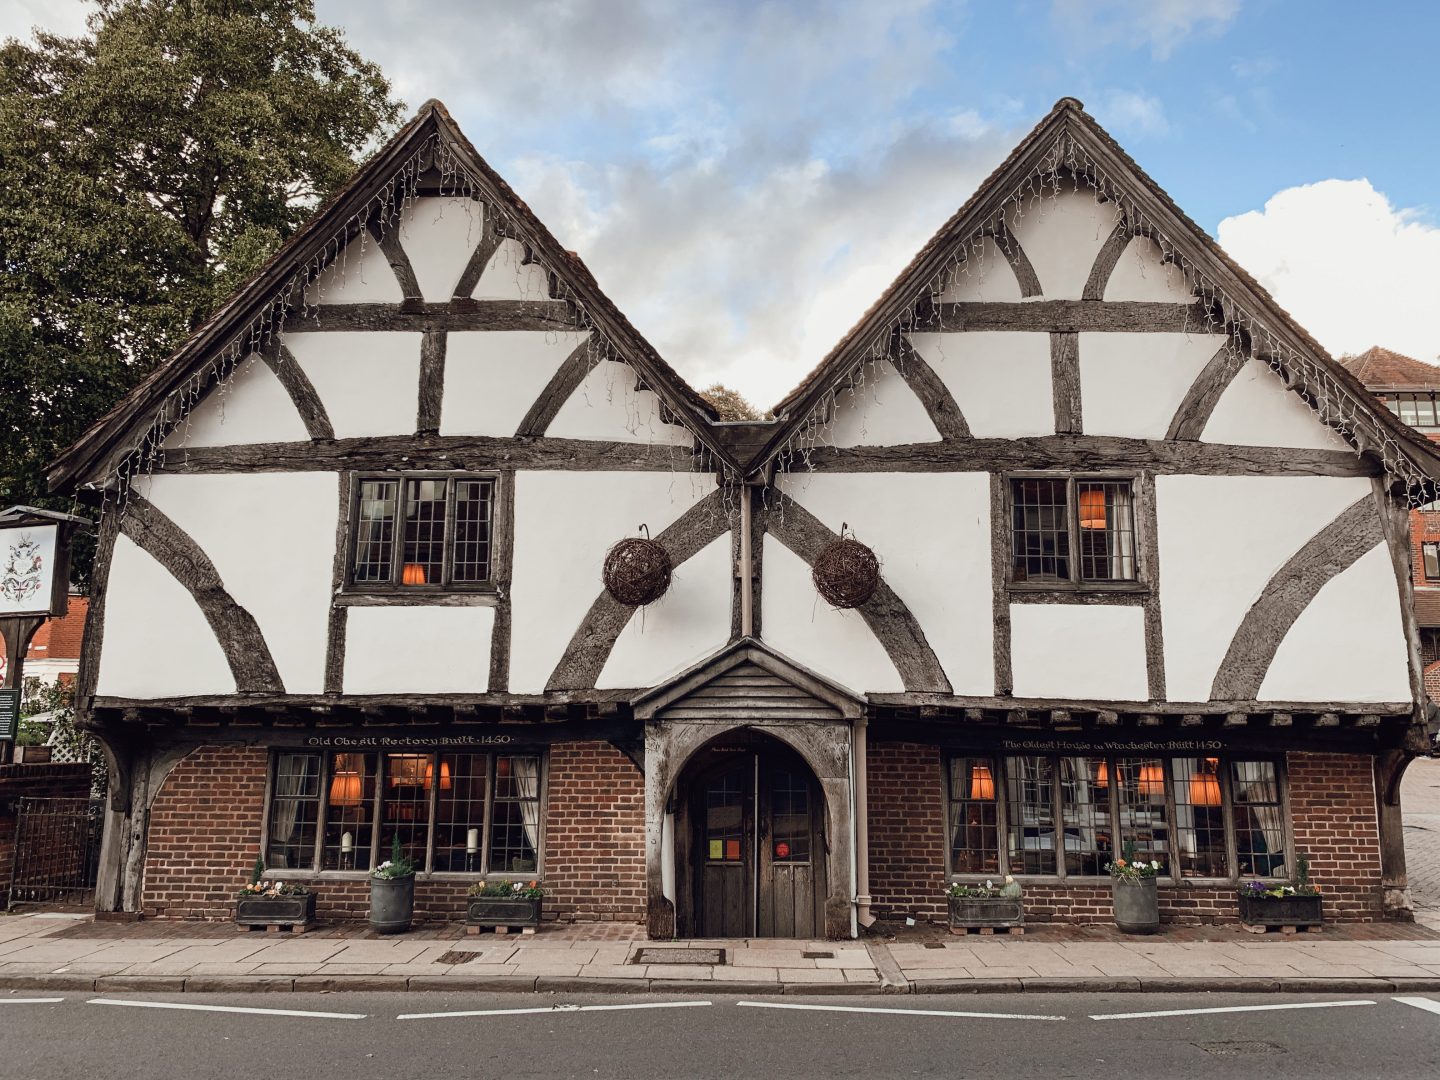 Winchester in England, perfect weekend away inspiration, holiday in the UK | Chesil Rectory Gourmet Restaurant | Where to eat in Winchester